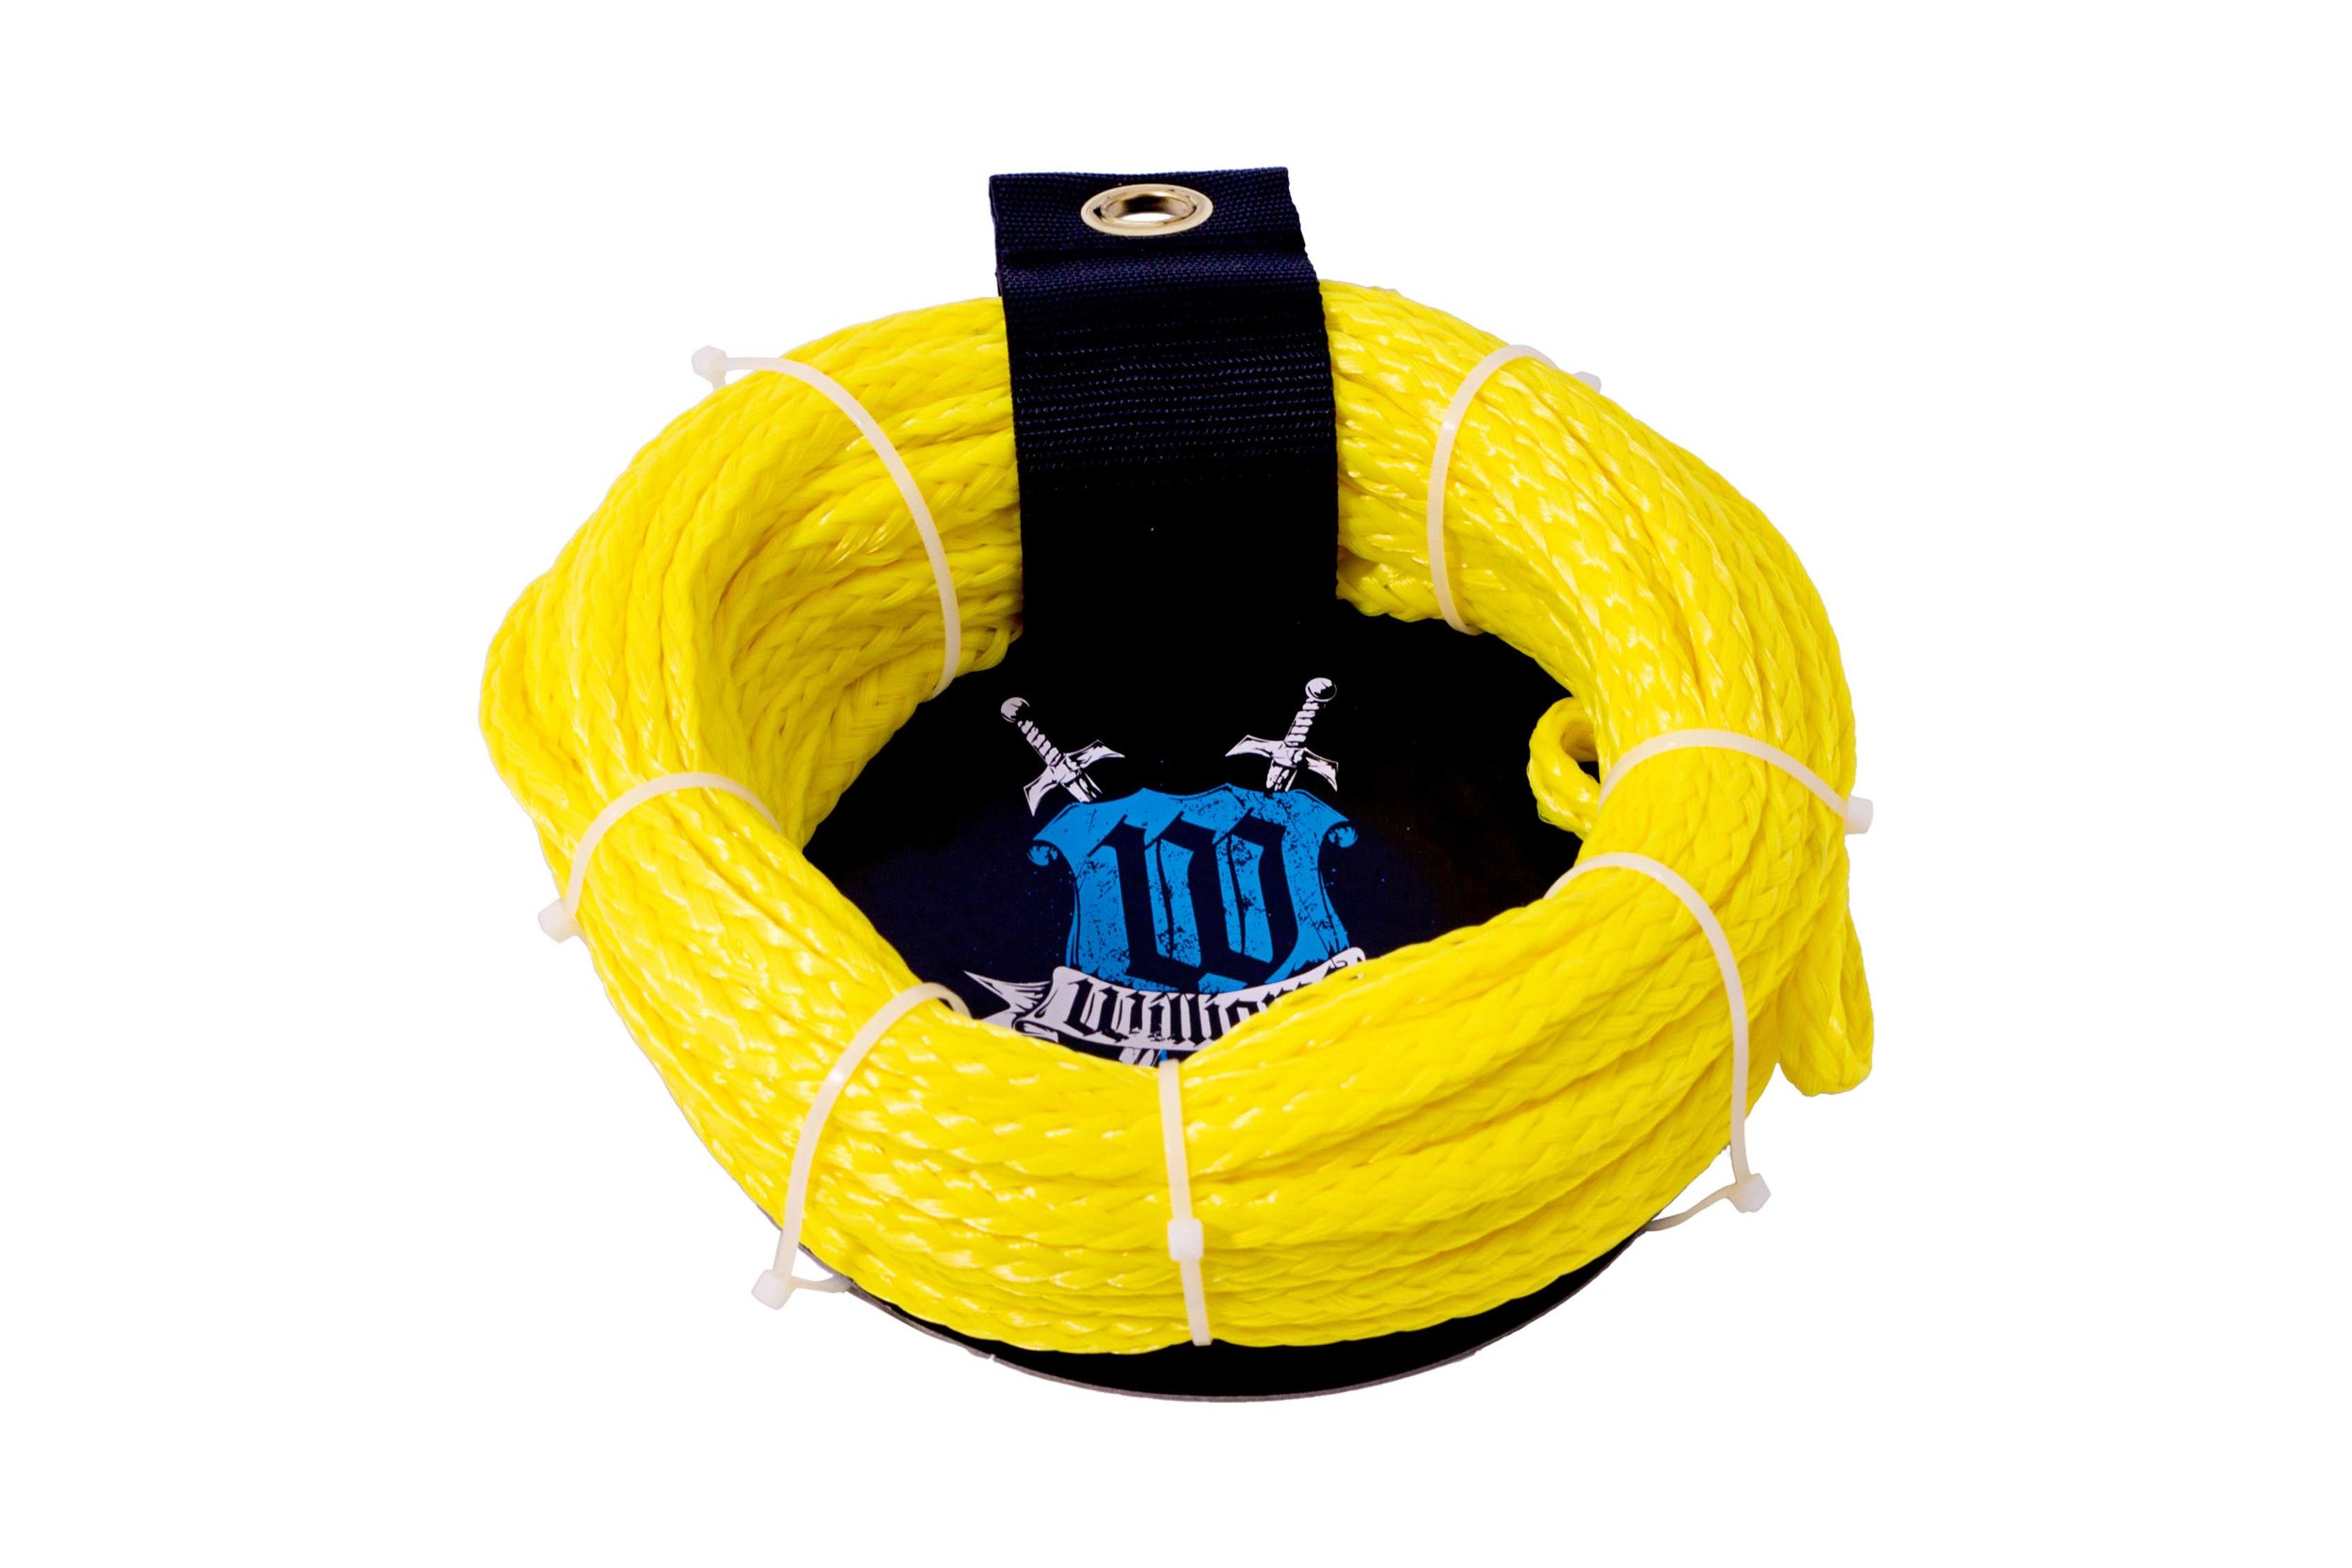 WILLIAMS 1 PERSON TUBE ROPE